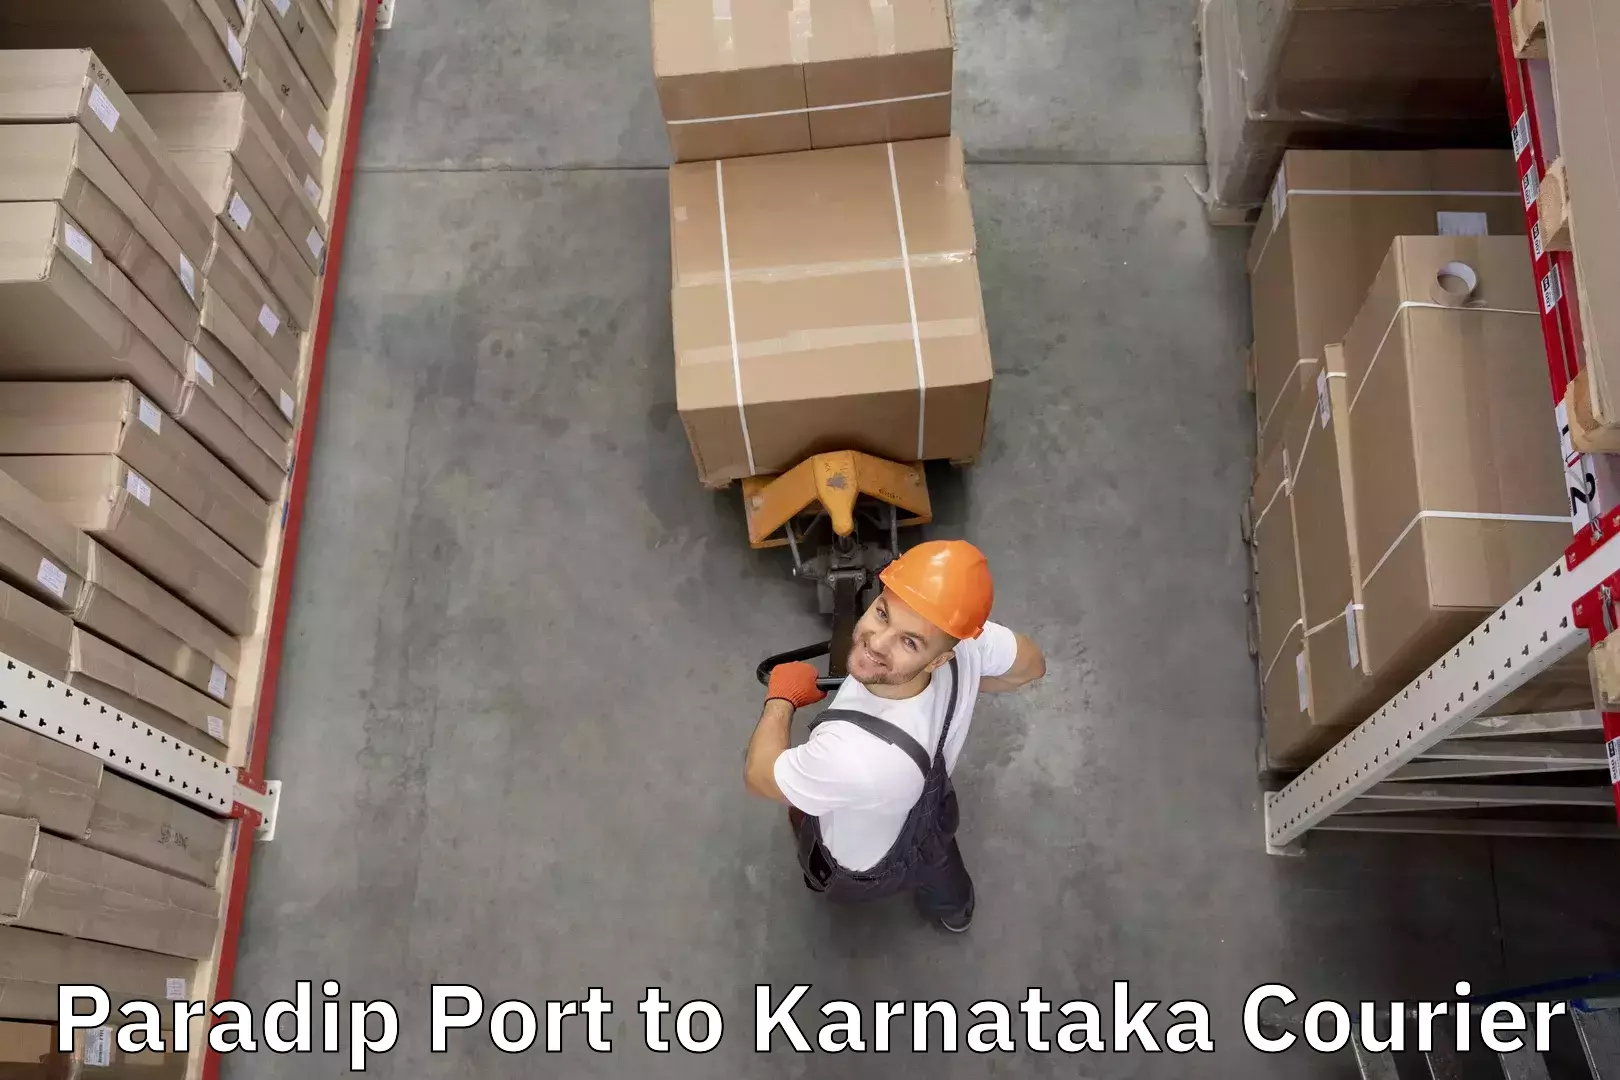 Luggage delivery network Paradip Port to yedrami